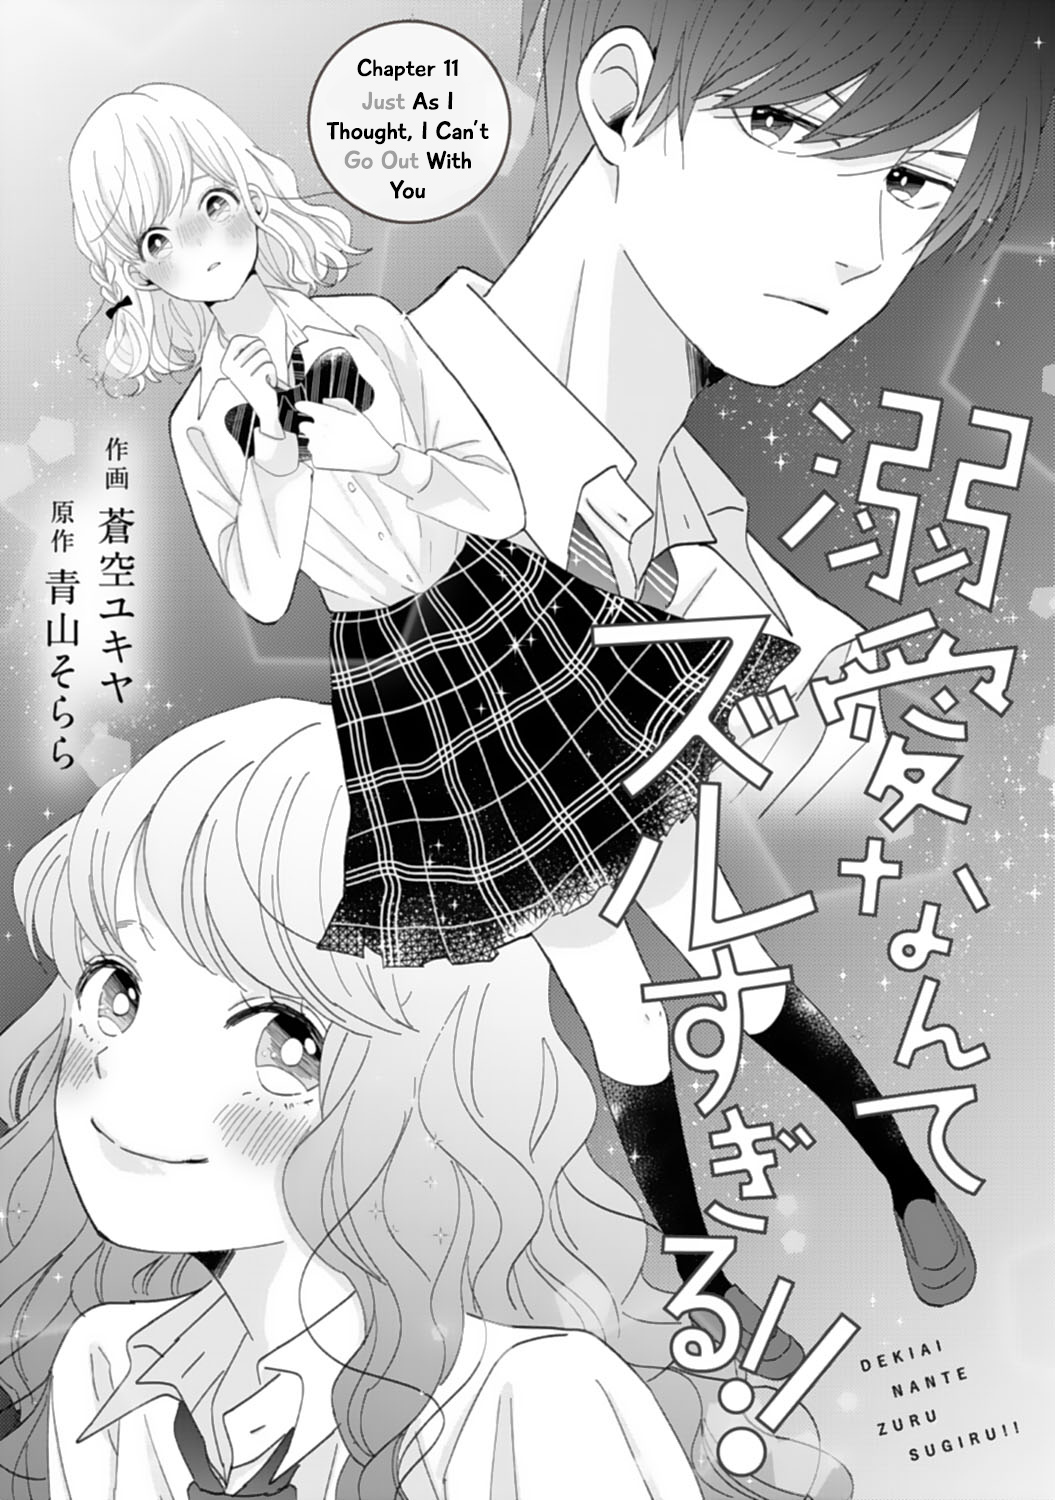 Dekiai Nante Zuru Sugiru!! Vol.3 Chapter 11: Just As I Thought, I Can't Go Out With You - Picture 2